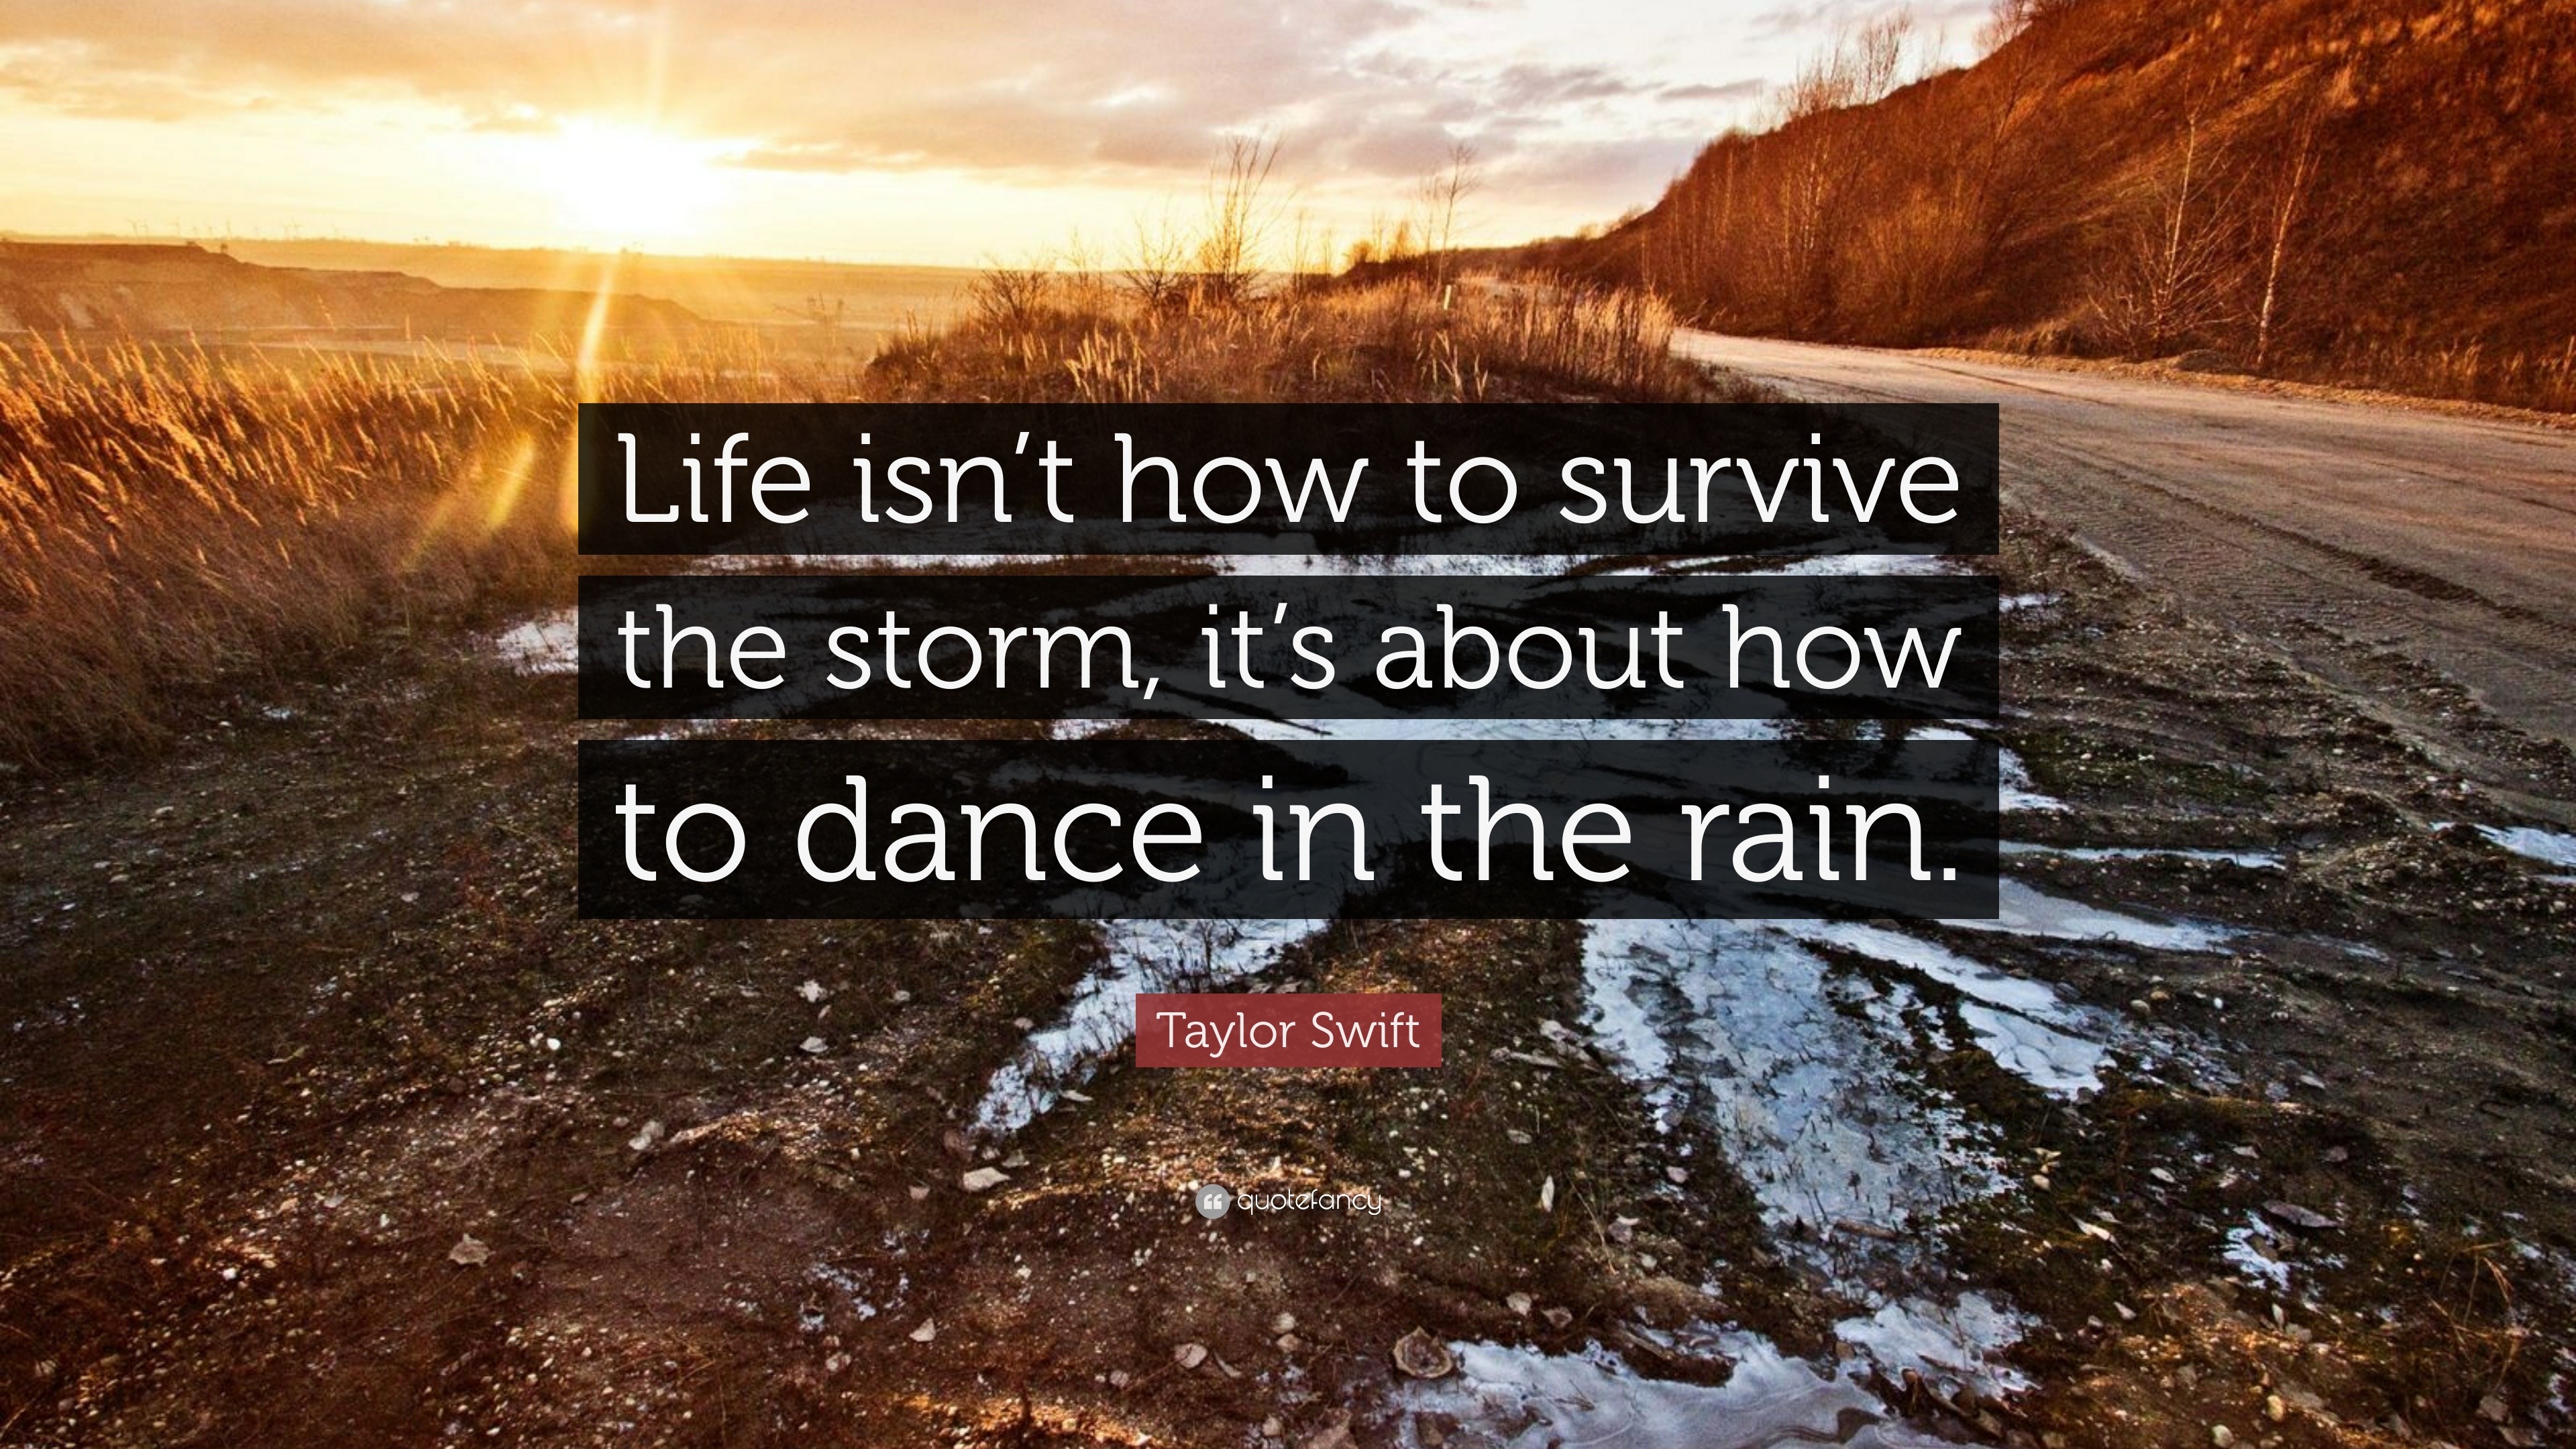 Taylor Swift Quote “Life isn t how to survive the storm it s